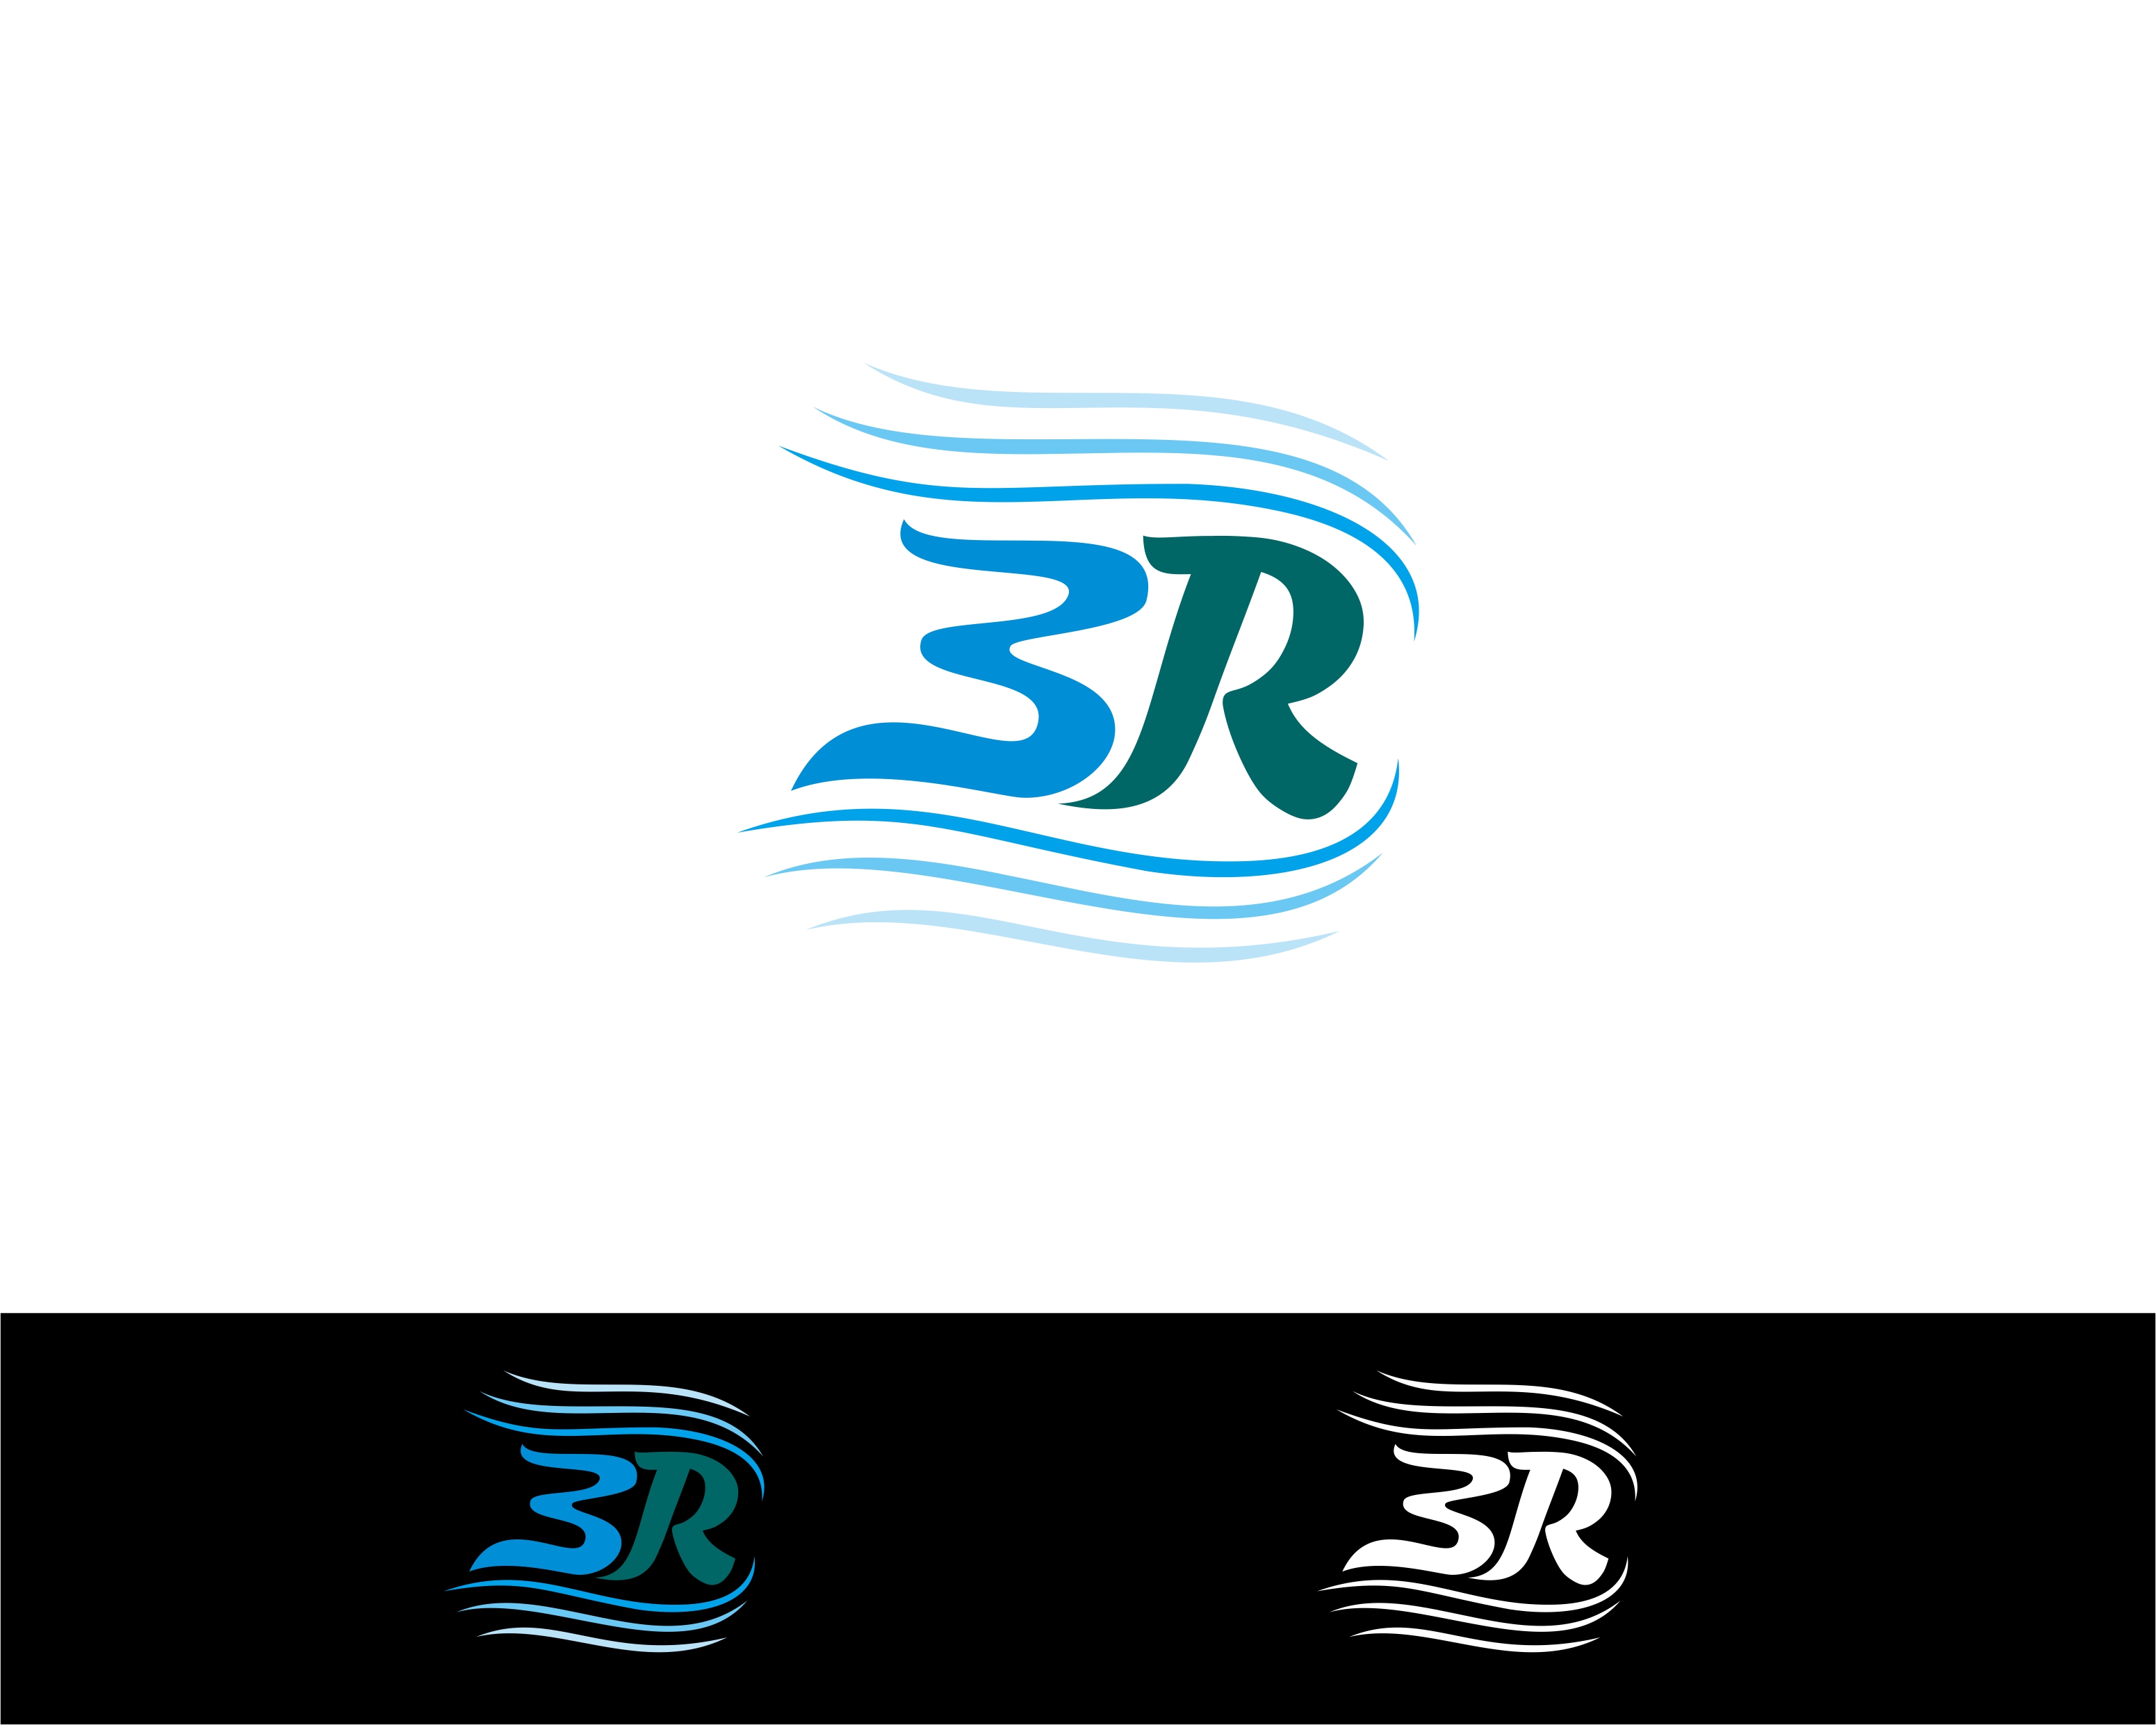 3r Symbol Reduce Reuse Recycle Illustration Stock Vector (Royalty Free)  2346977369 | Shutterstock